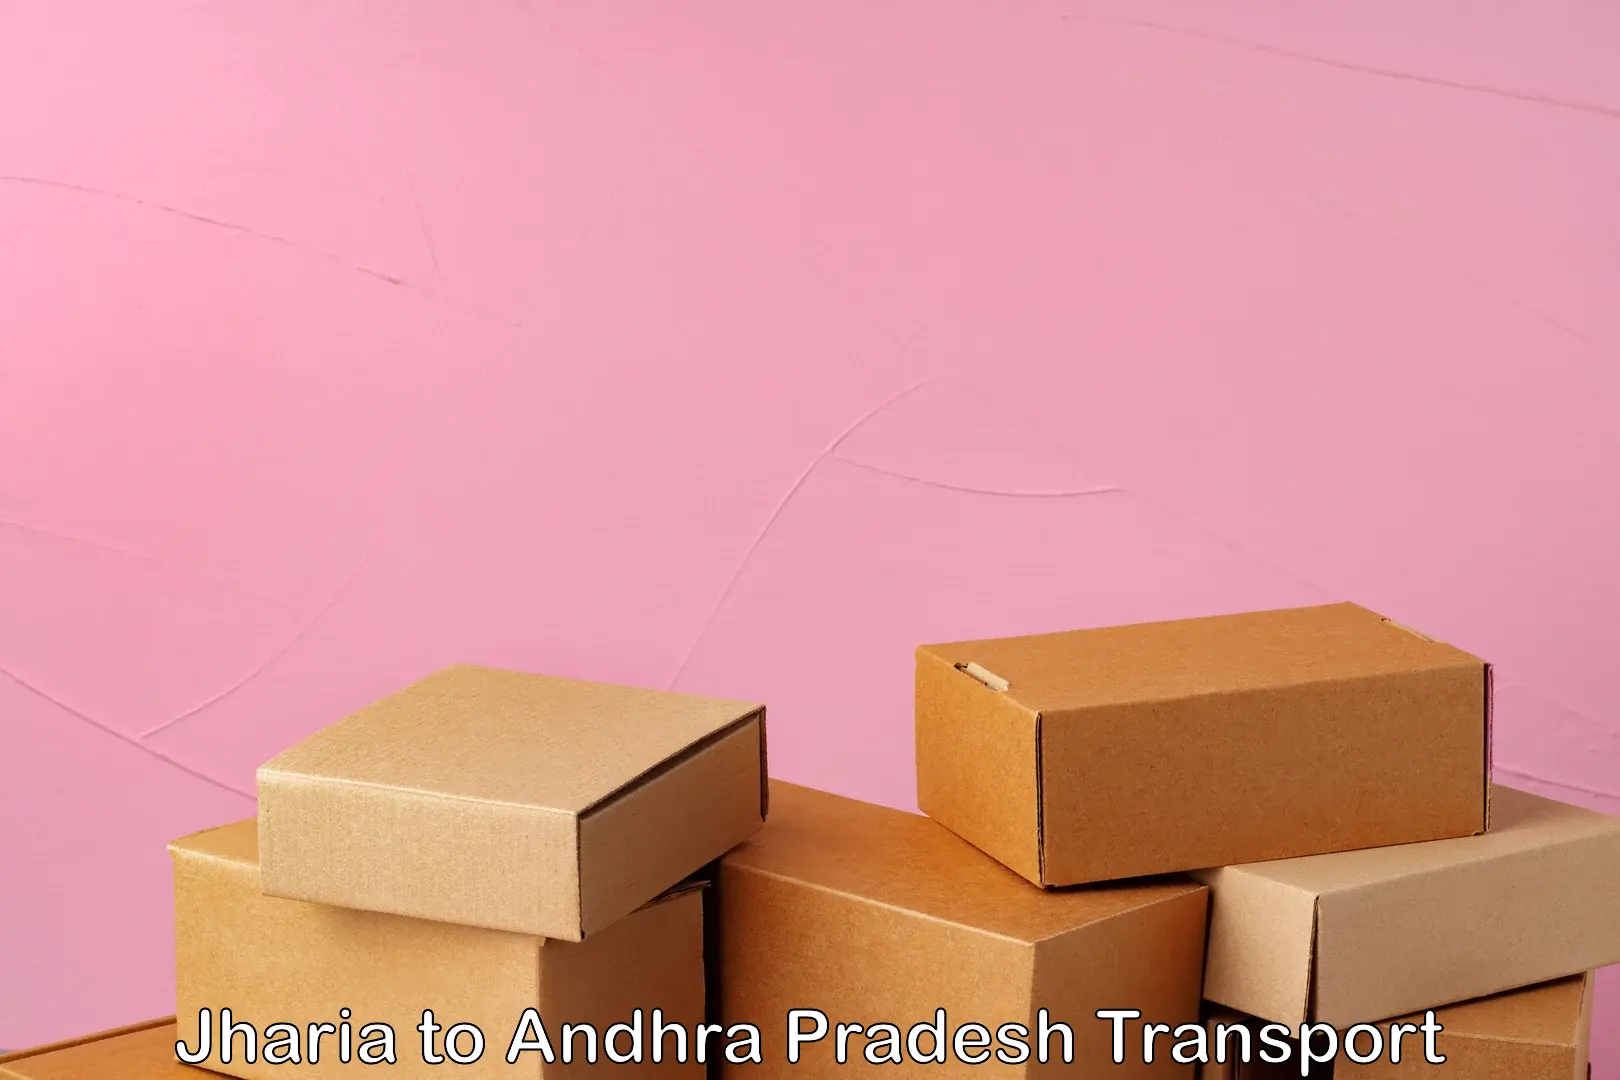 Truck transport companies in India Jharia to Andhra Pradesh